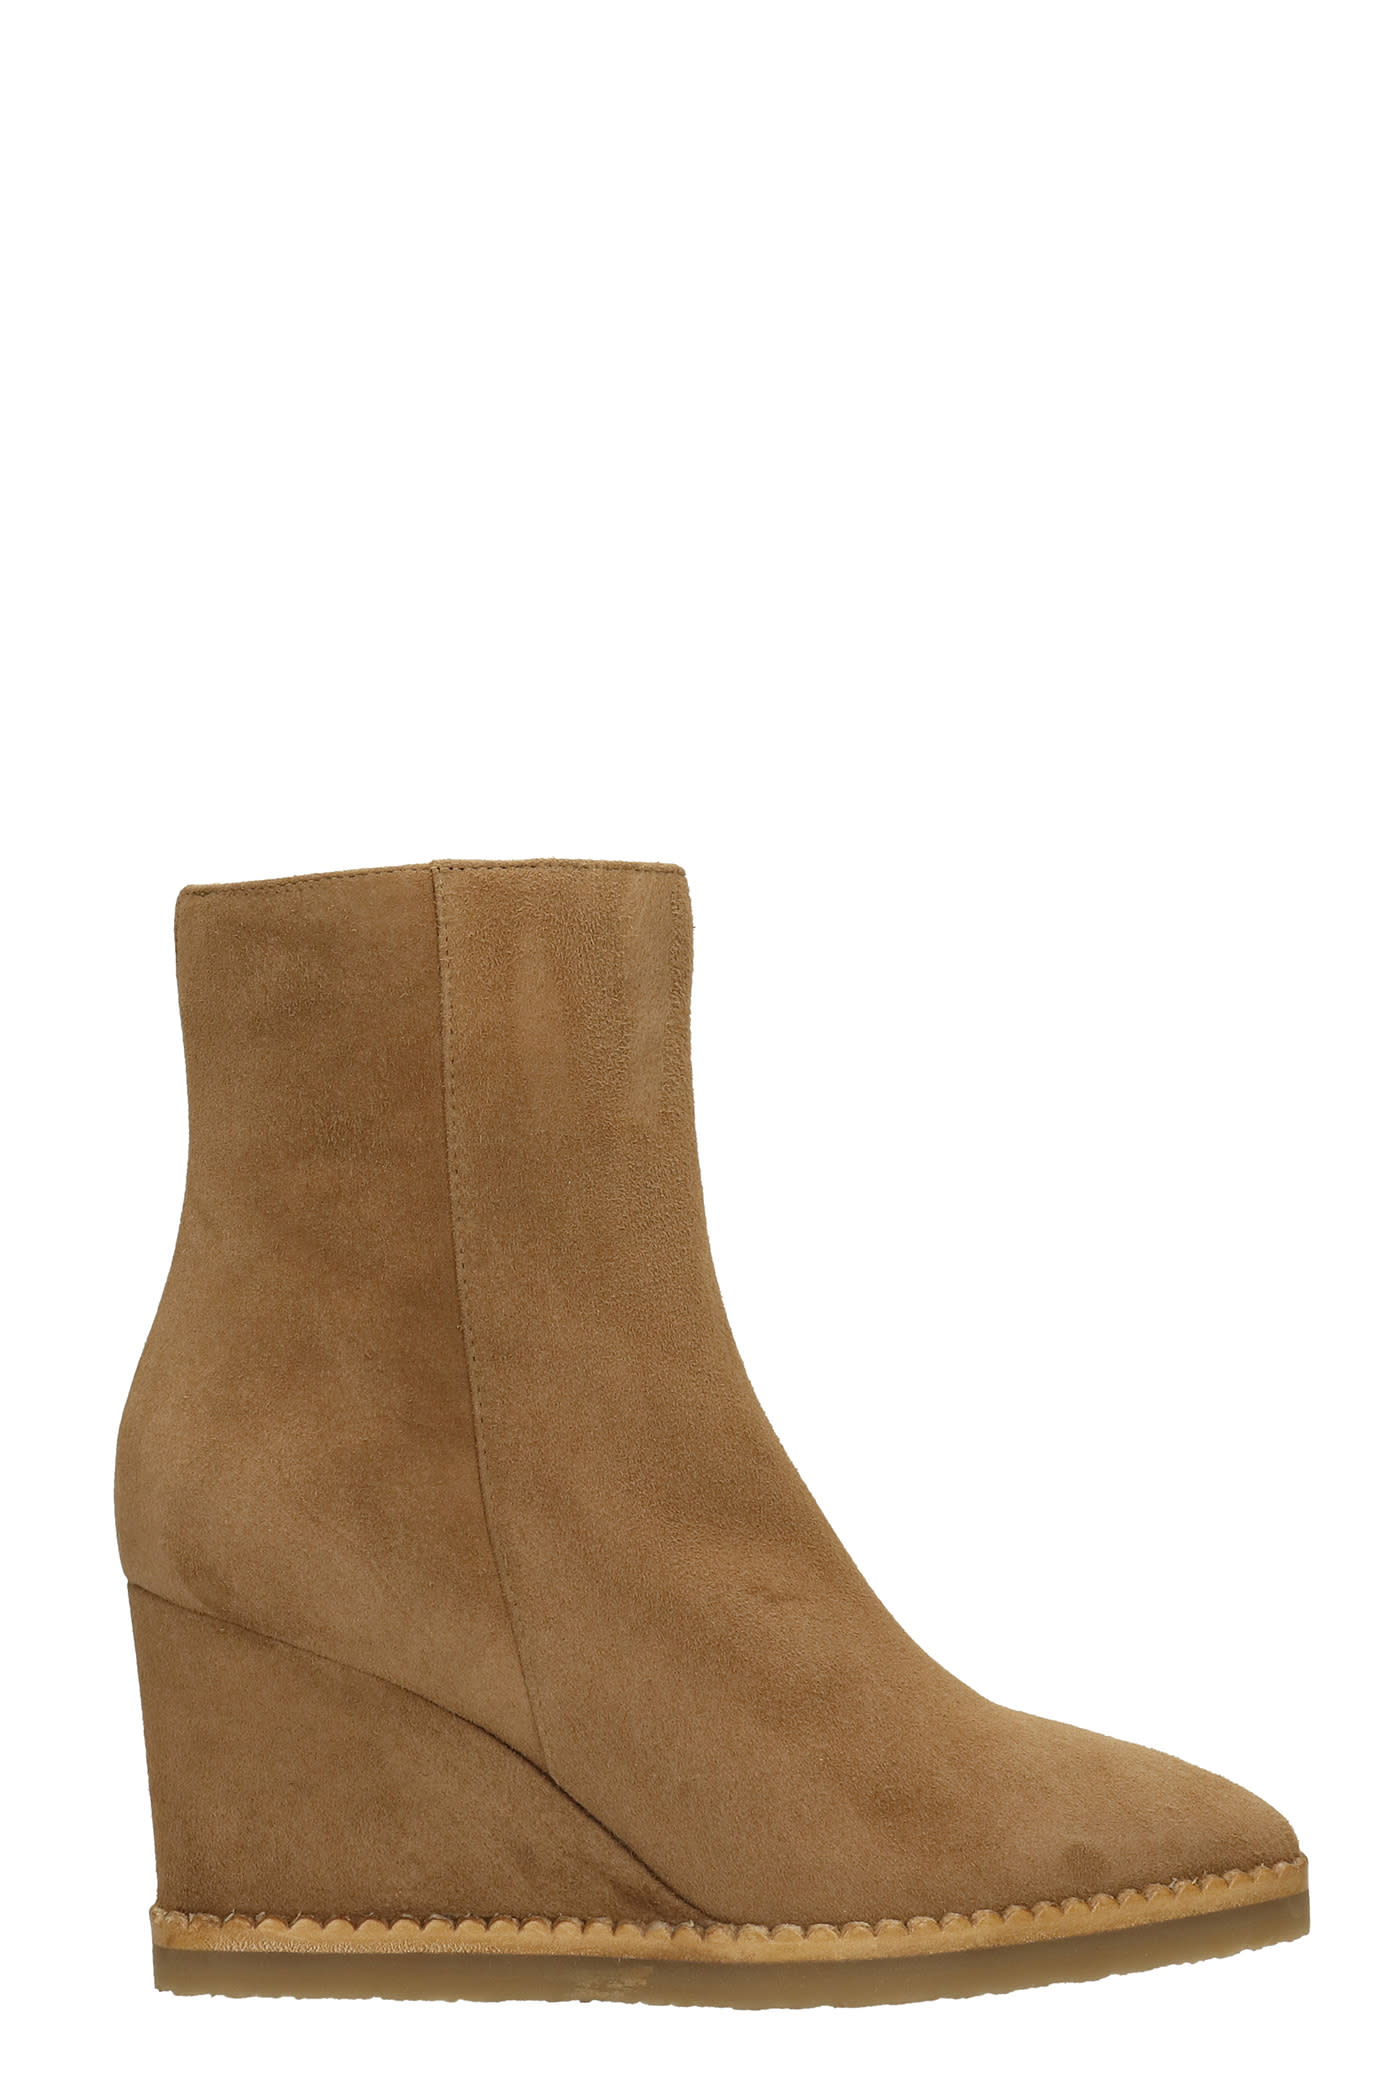 The Seller Ankle Boots Inside Wedge In Beige Suede